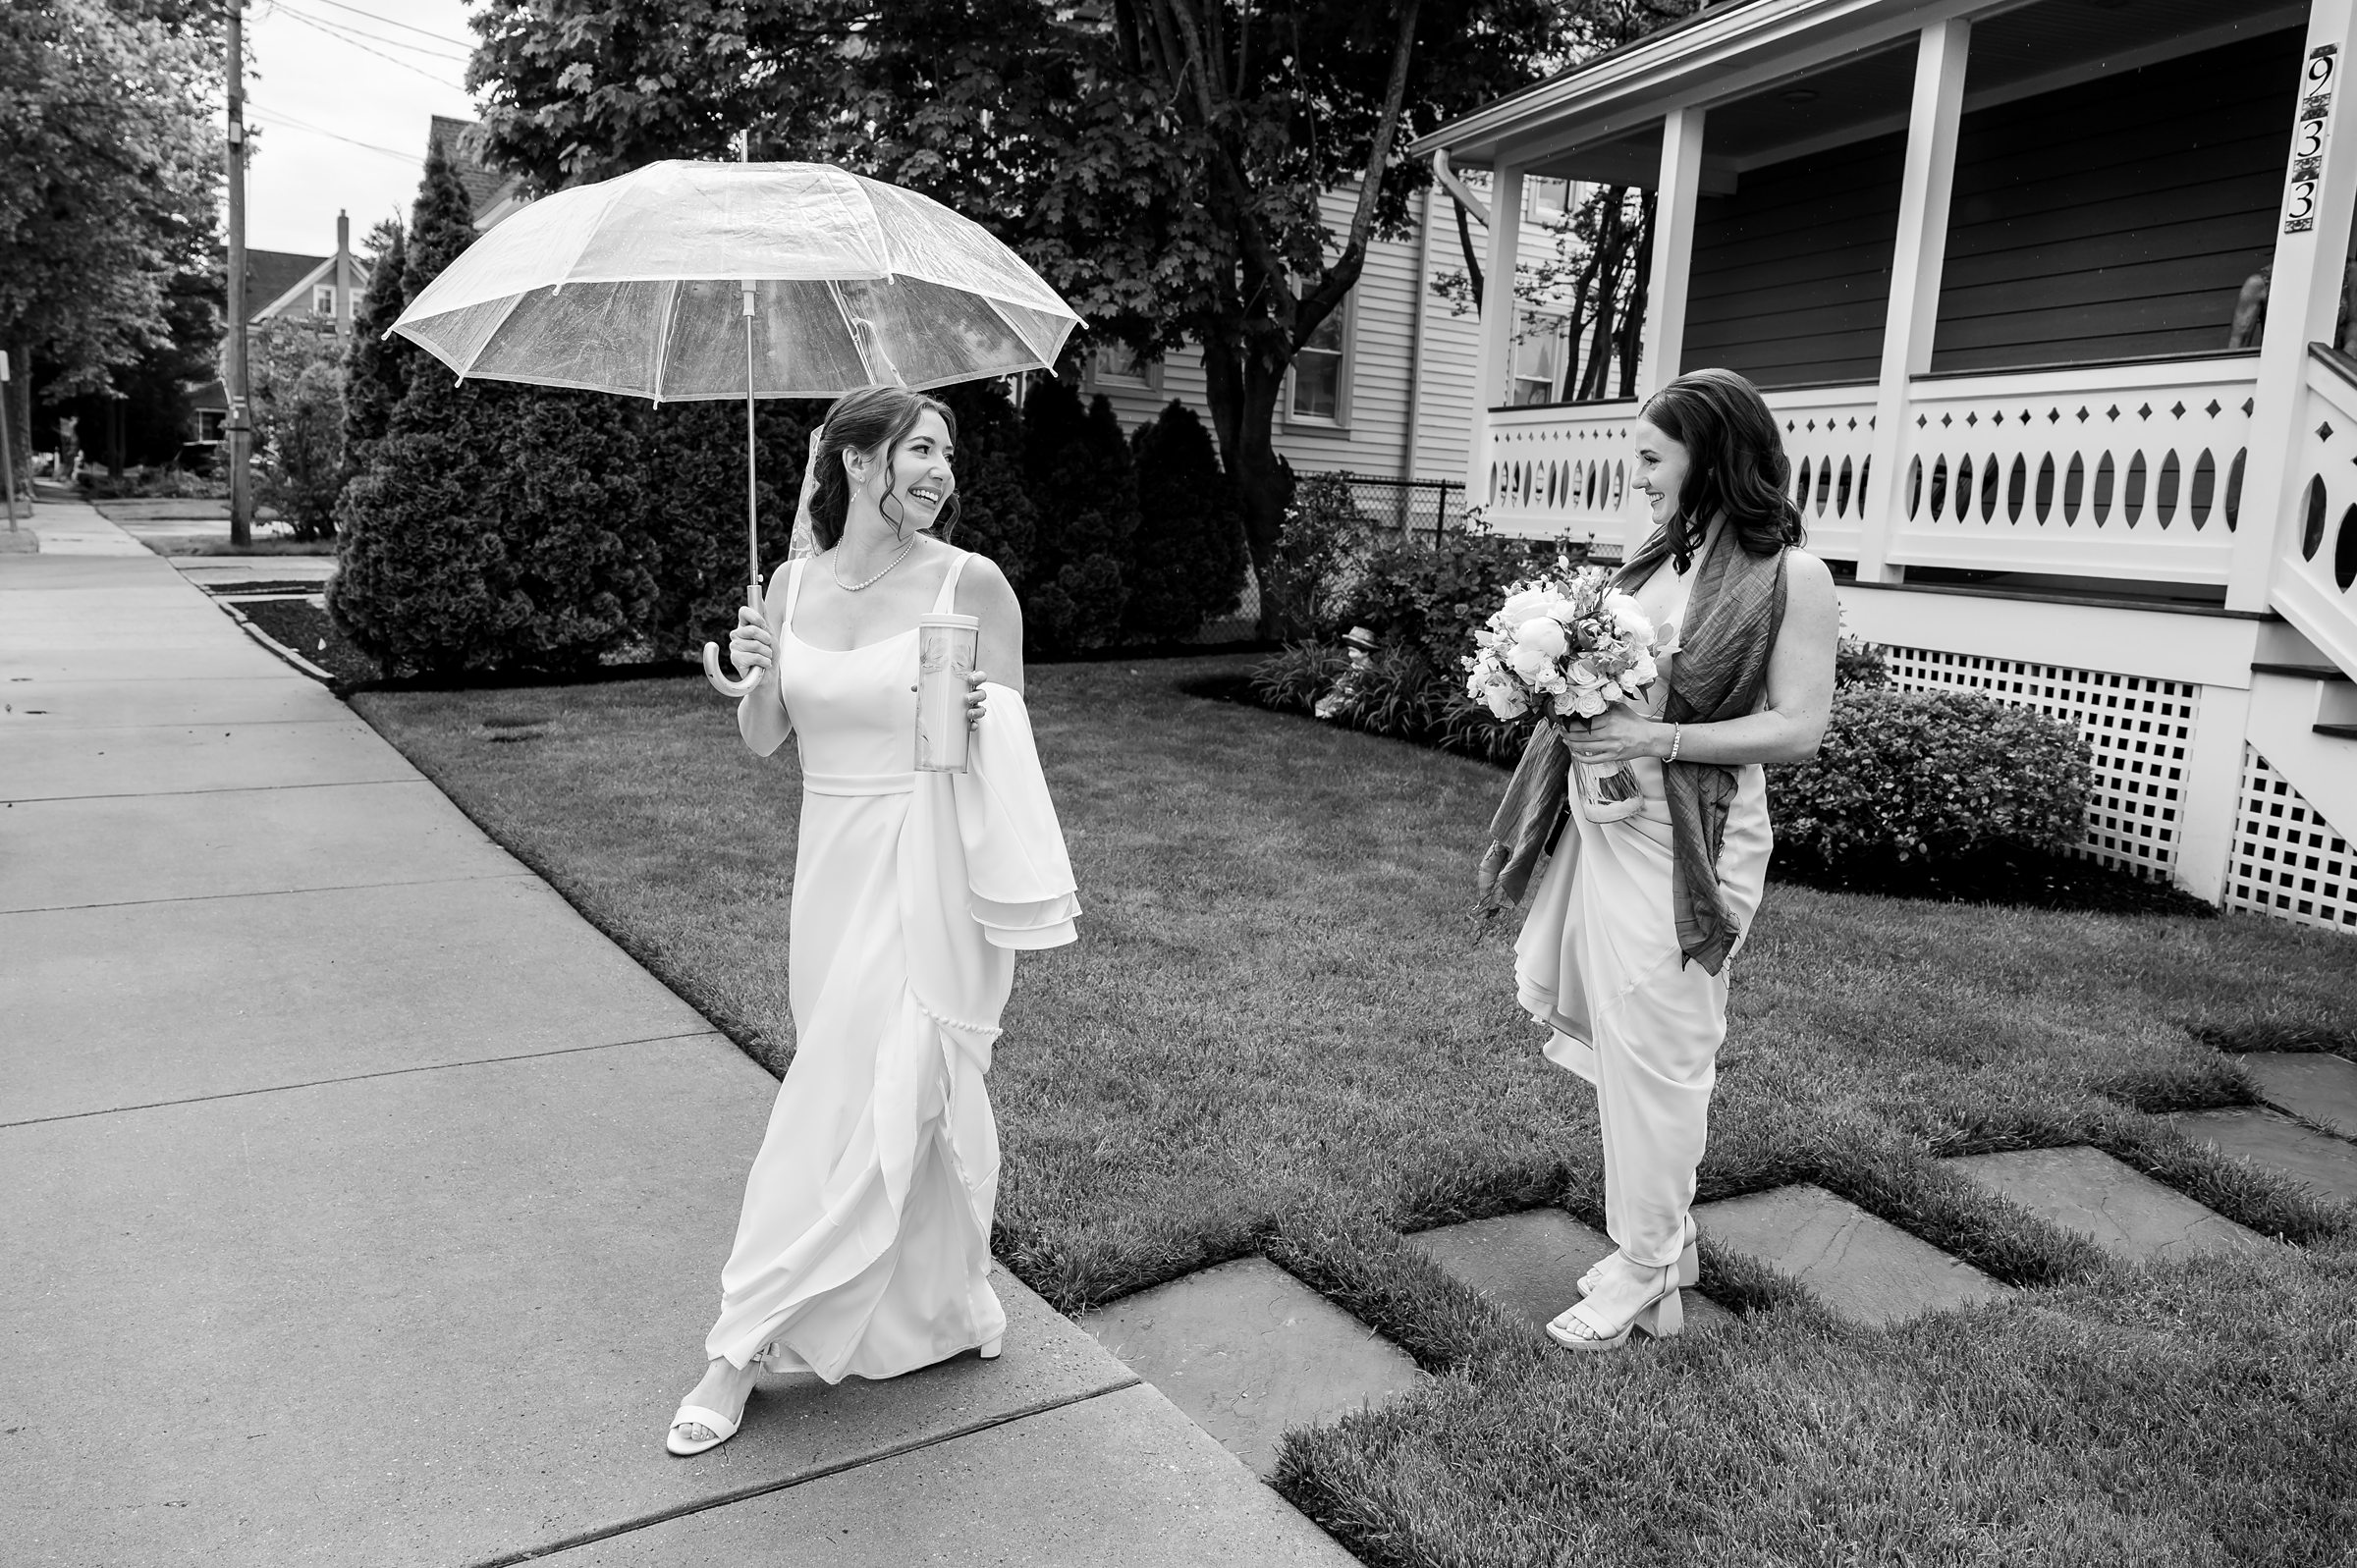 Two women wearing dresses walk near a house, one holding a transparent umbrella and a drink, and the other carrying a bouquet of flowers.